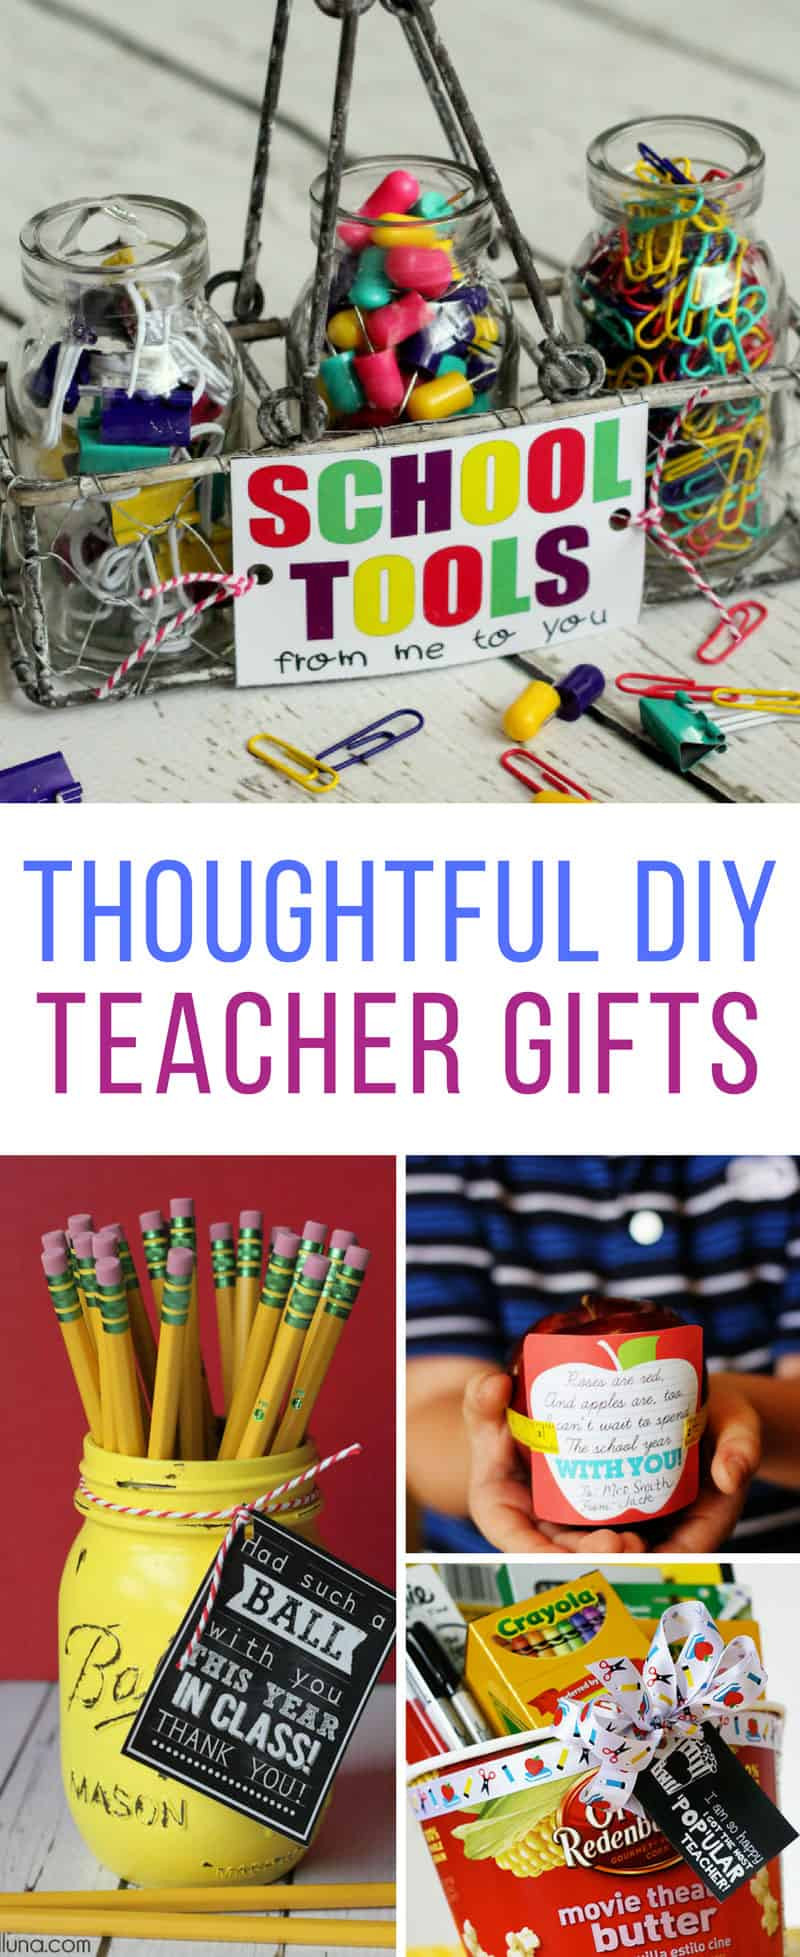 DIY Teacher Gifts
 DIY Back to School Teacher Gifts That Are Super CUTE